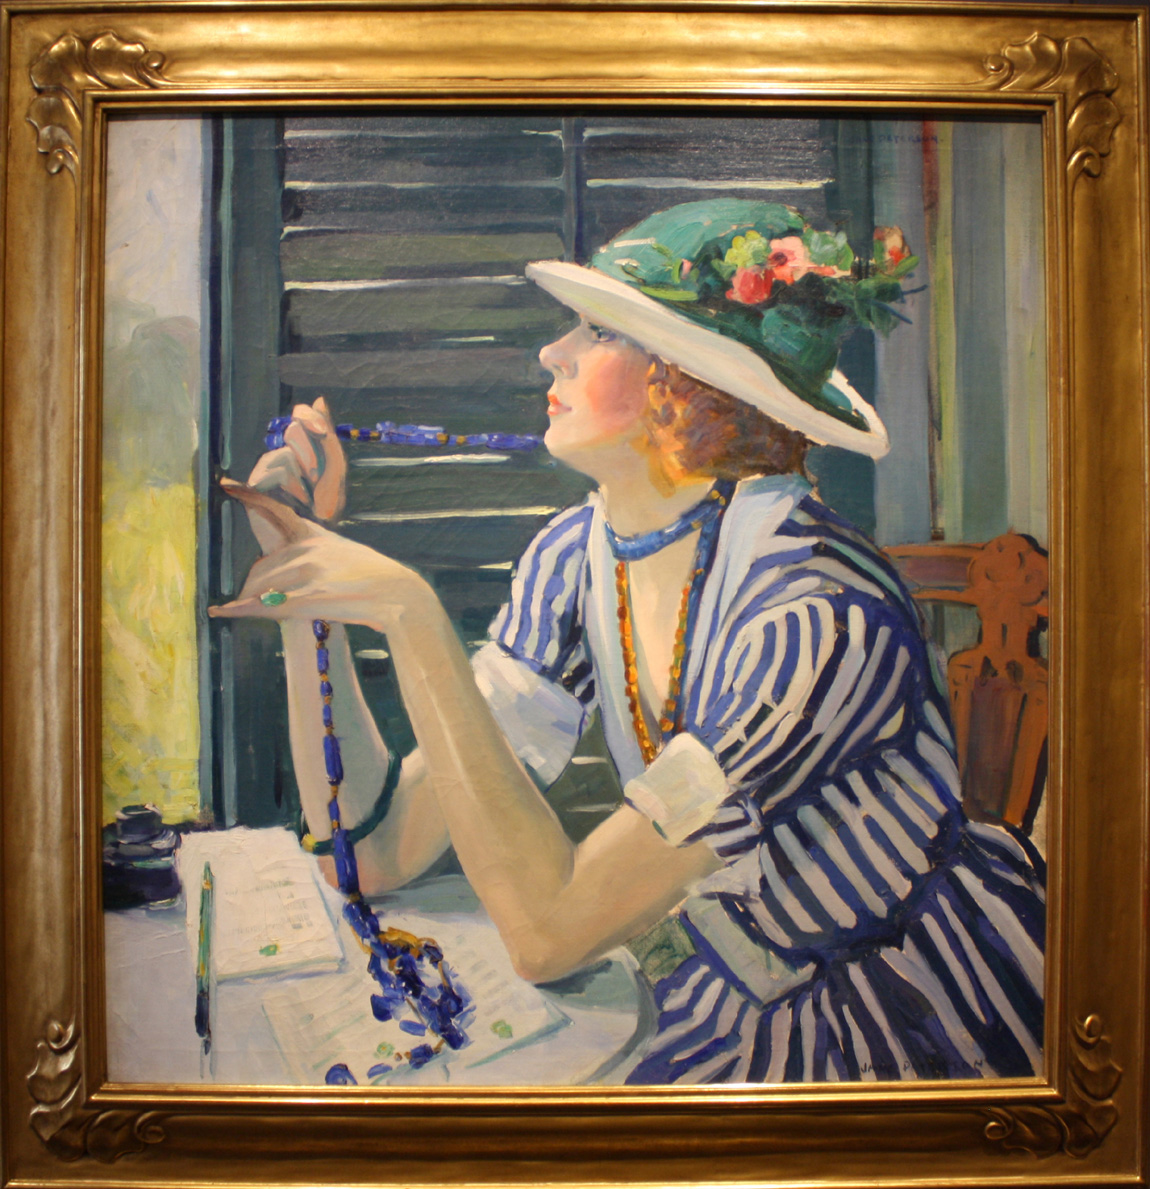 Debra Force Fine Art (69th Street) displayed this Jane Peterson oil portrait from circa 1929, “The Answer.”